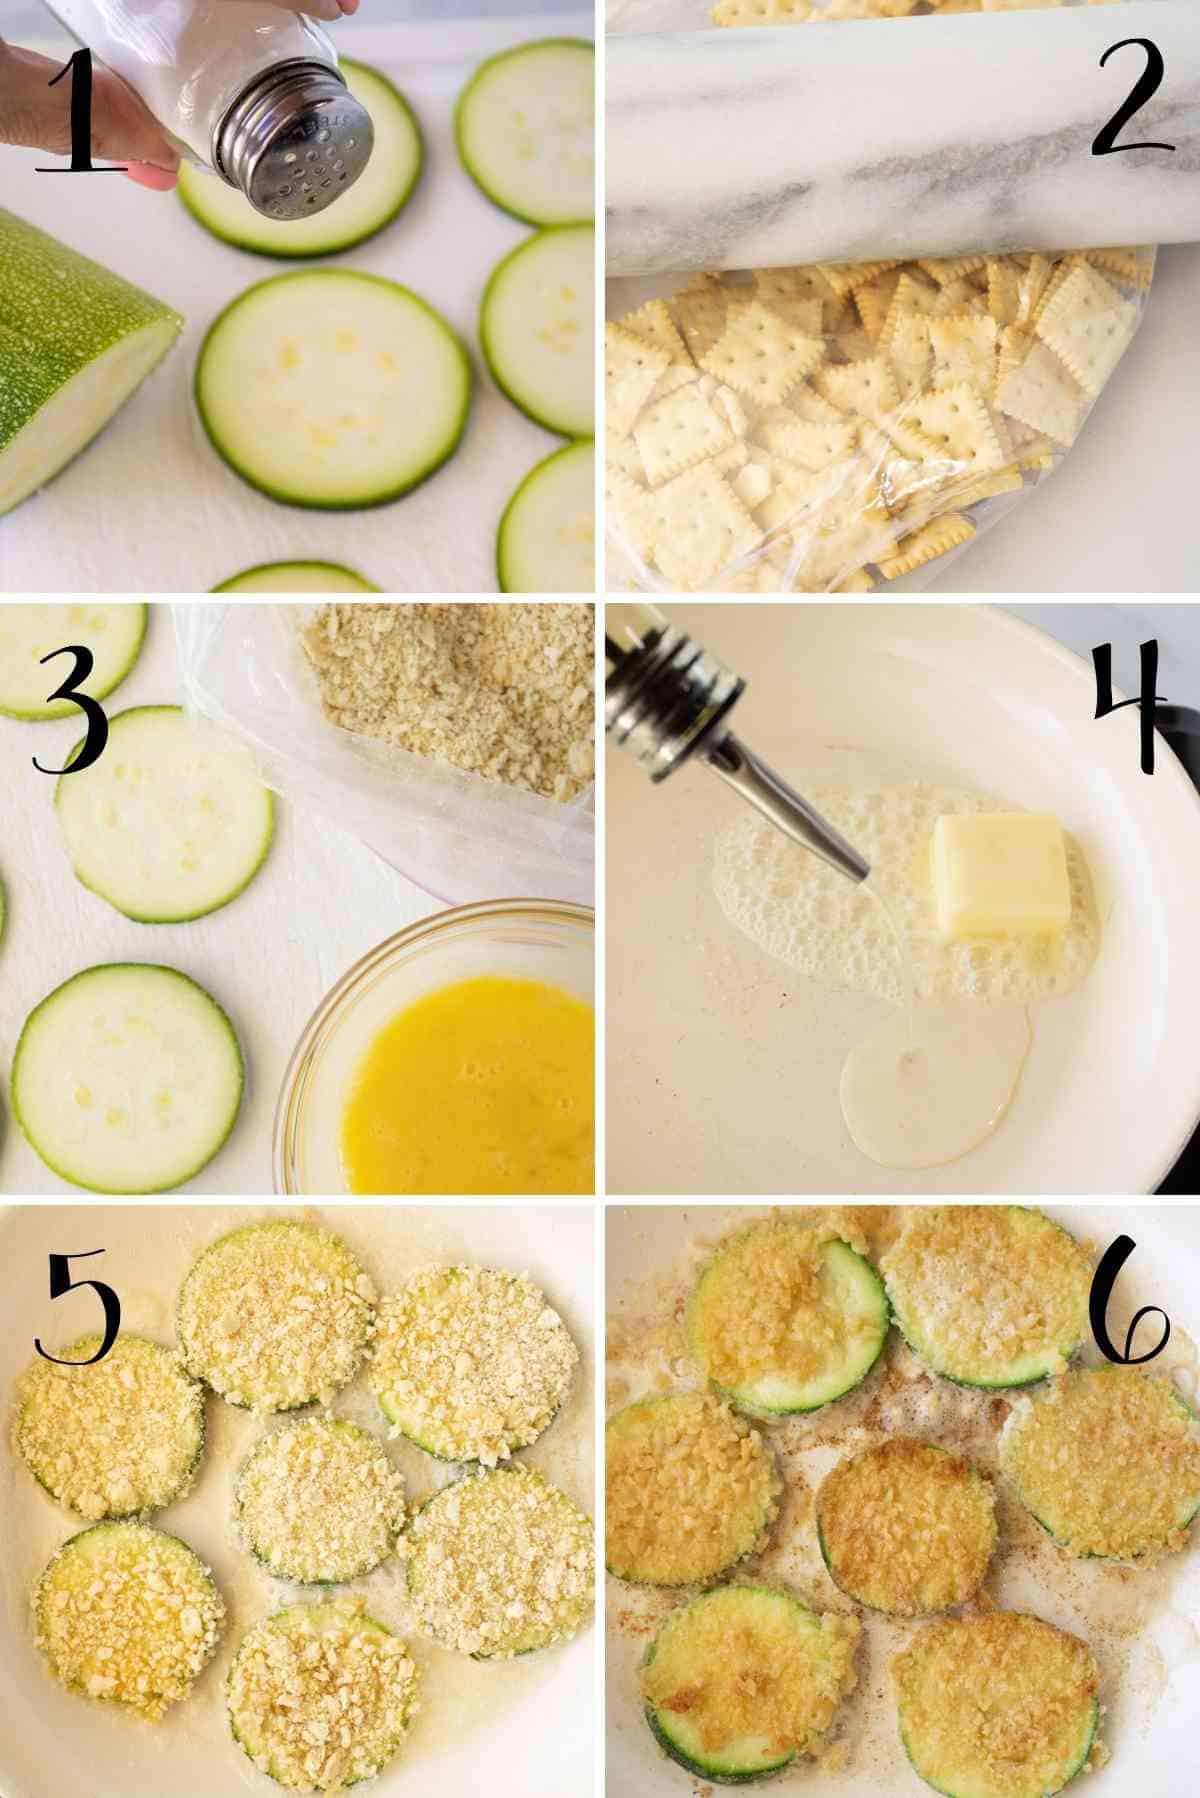 Steps showing how to fry the zucchini.